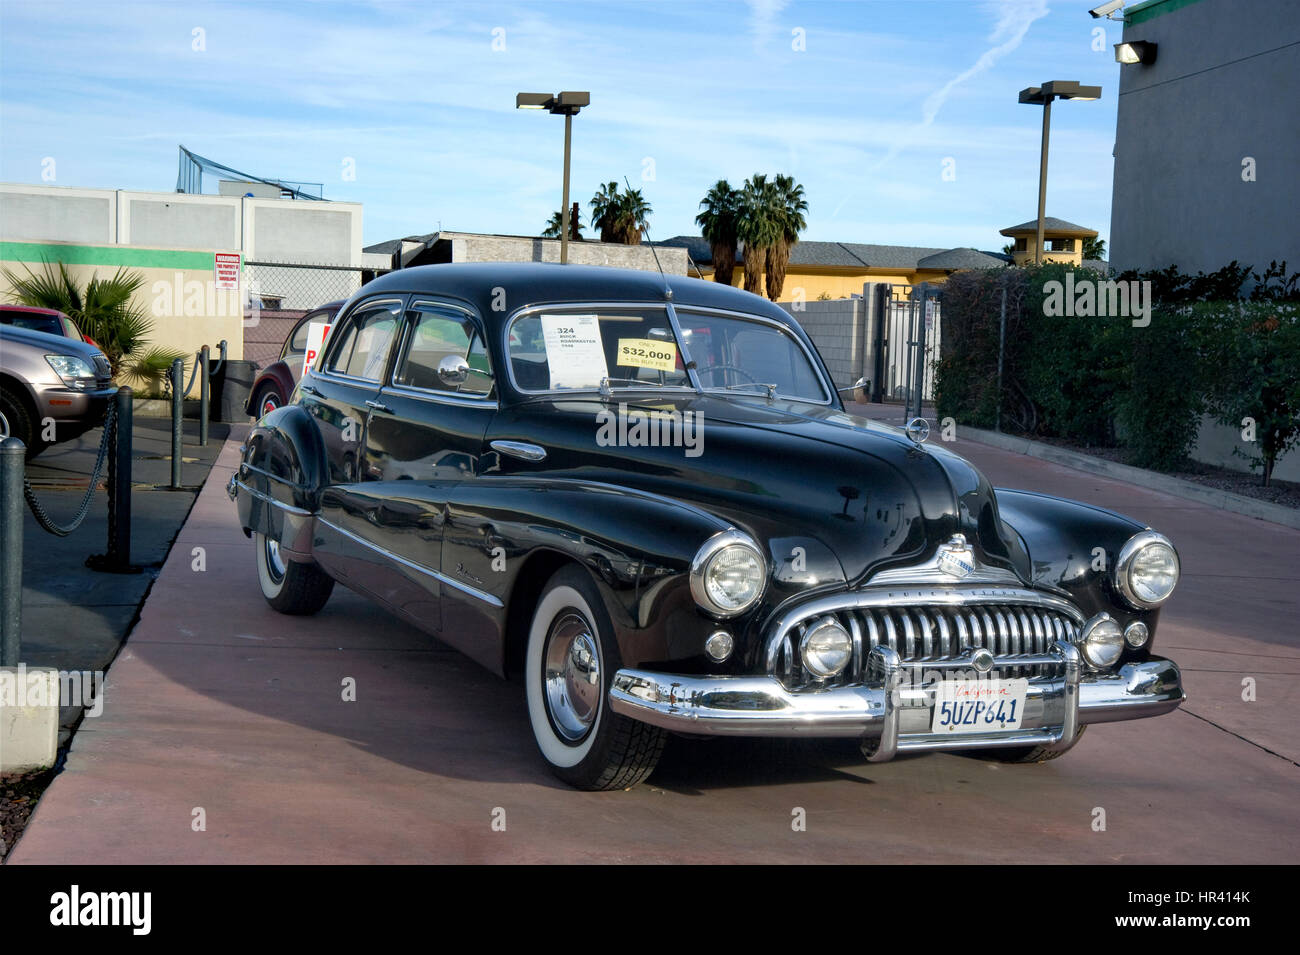 Classic Buick for sale in dealership in Palm Springs, CA Stock Photo